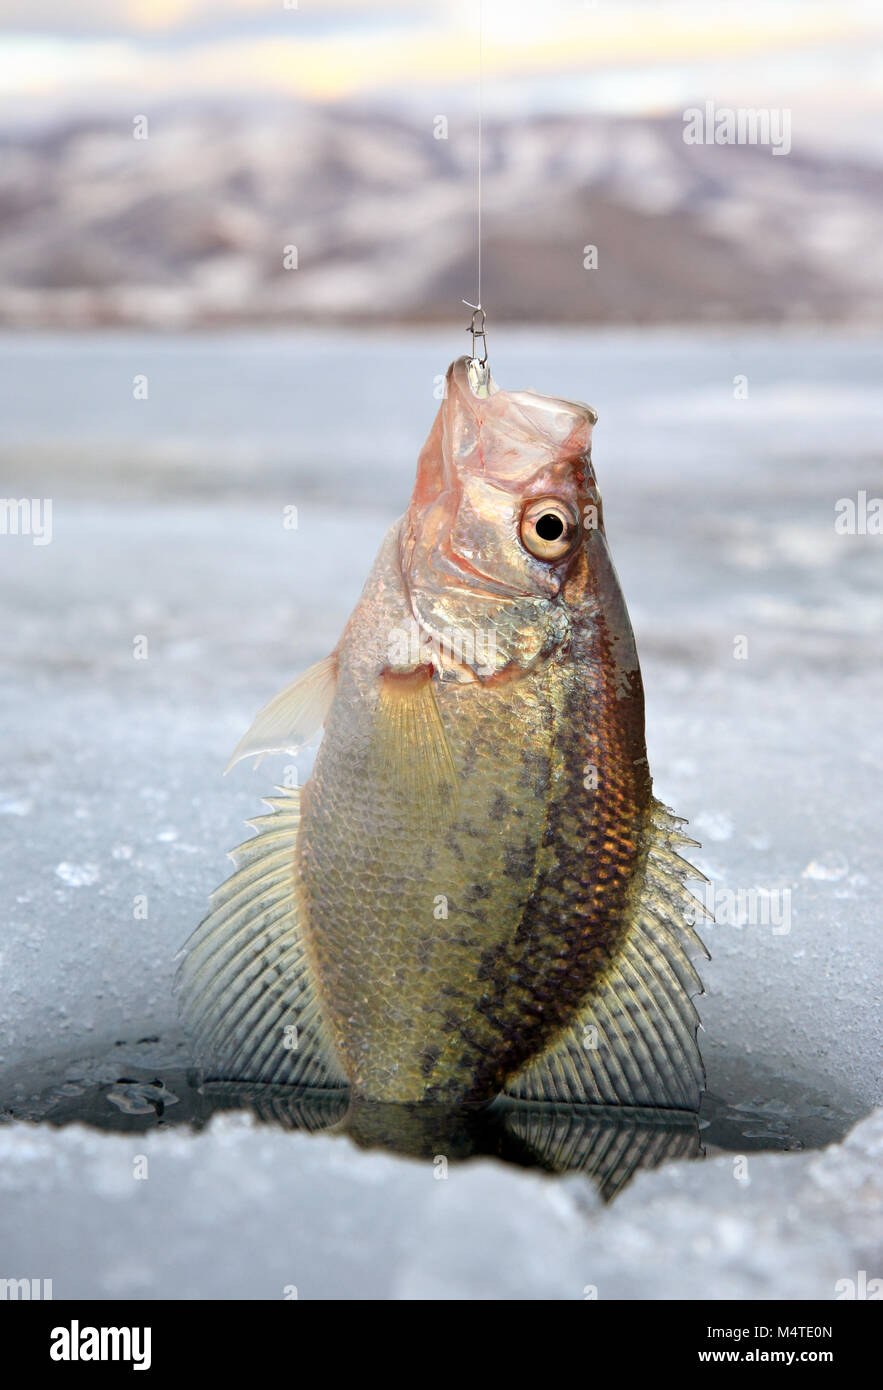 crappie fish being pulled out of ice hole in Northern Utah Stock Photo